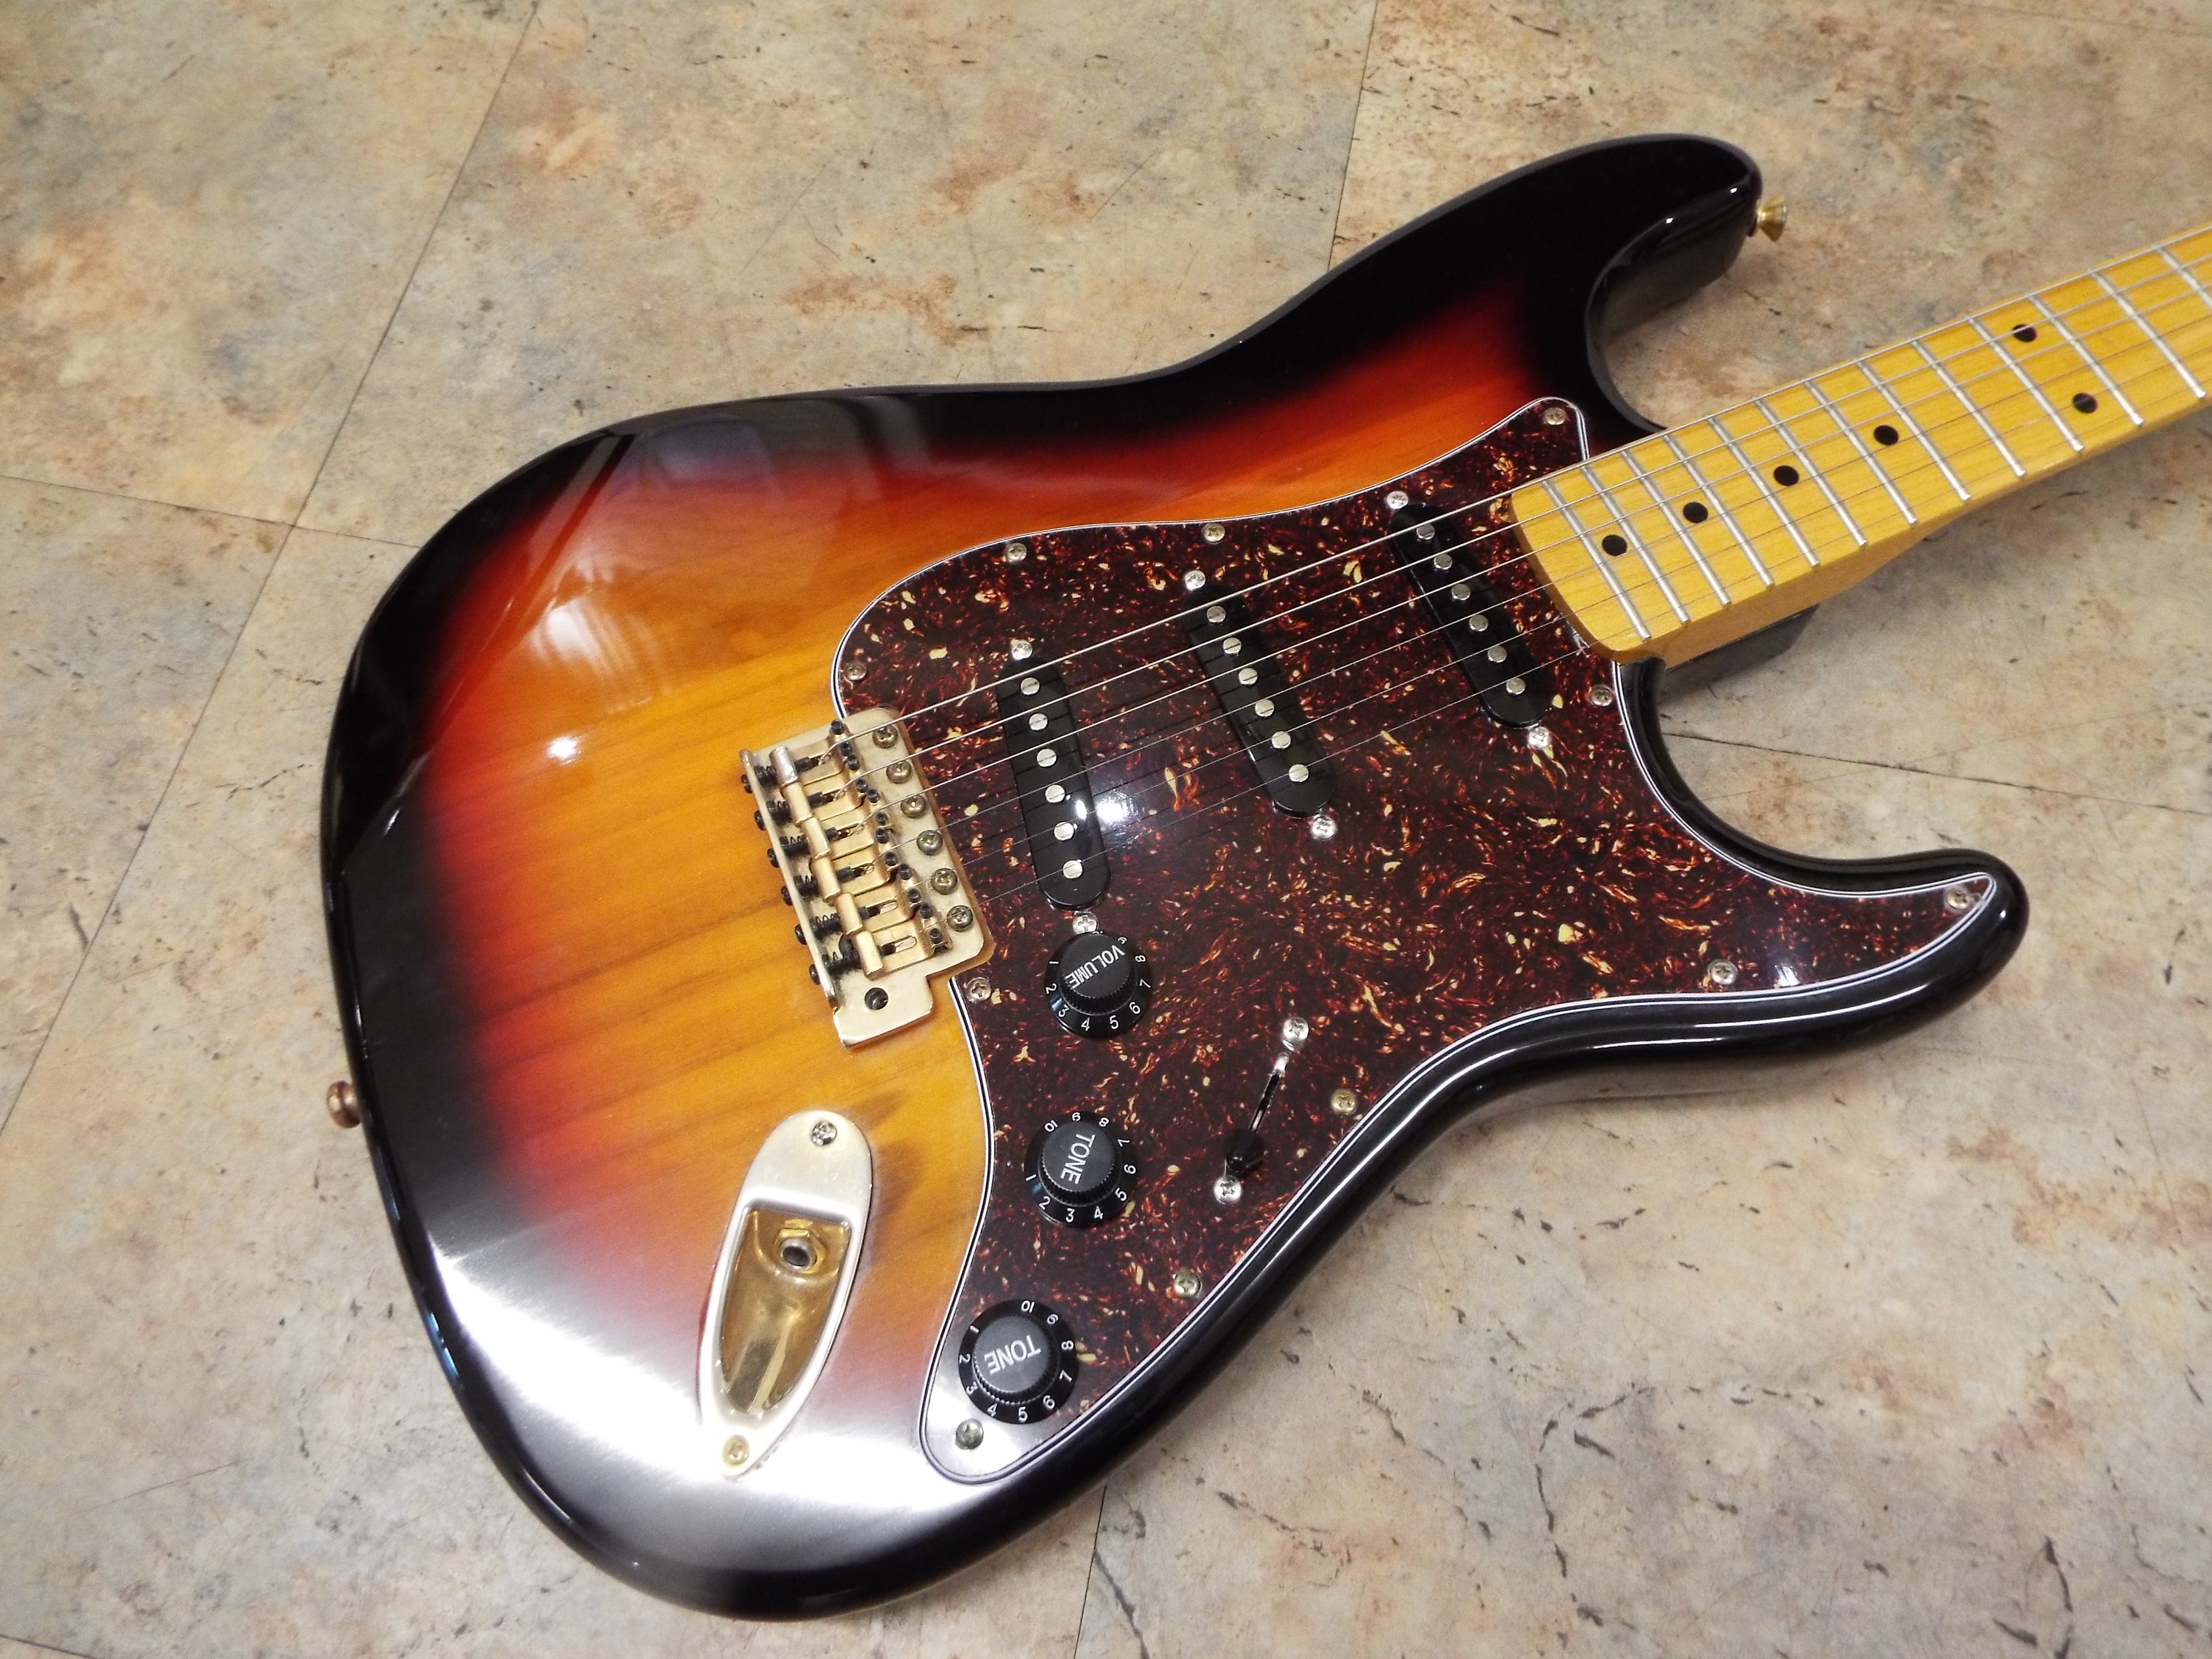 A Stratocaster shaped electric Guitar marked Fender with maple neck, - Image 2 of 8